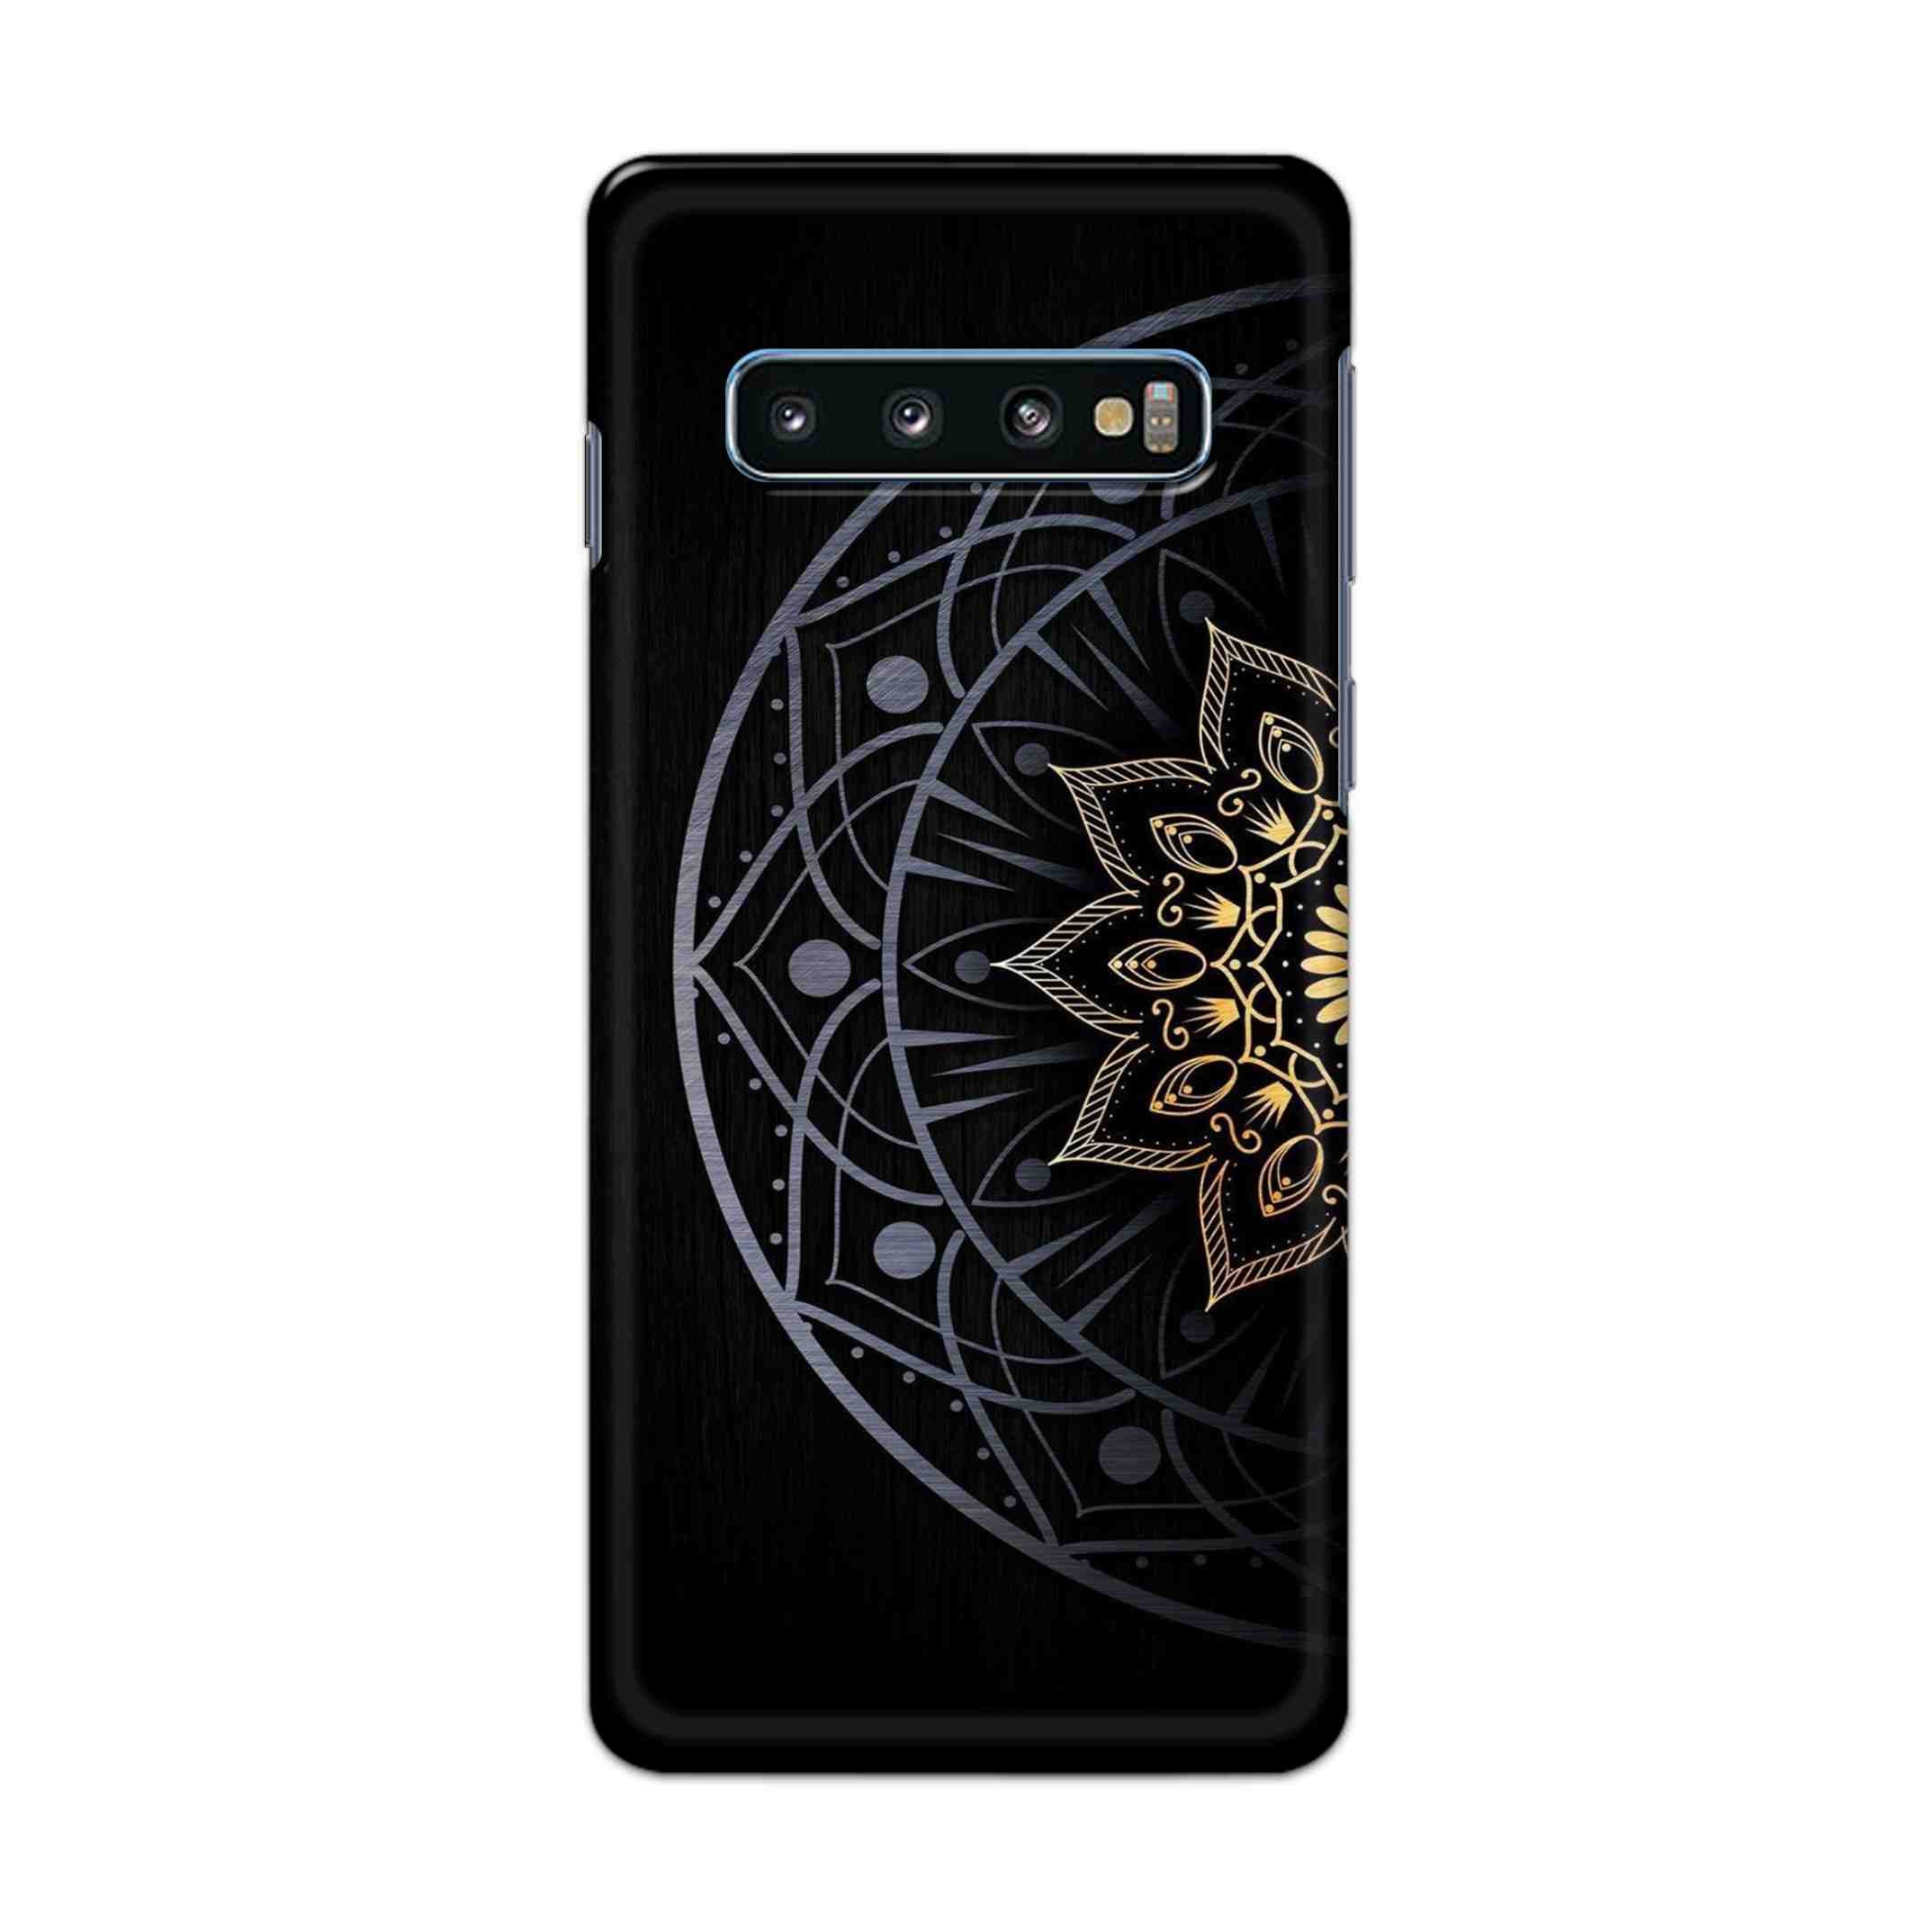 Buy Psychedelic Mandalas Hard Back Mobile Phone Case Cover For Samsung Galaxy S10 Plus Online